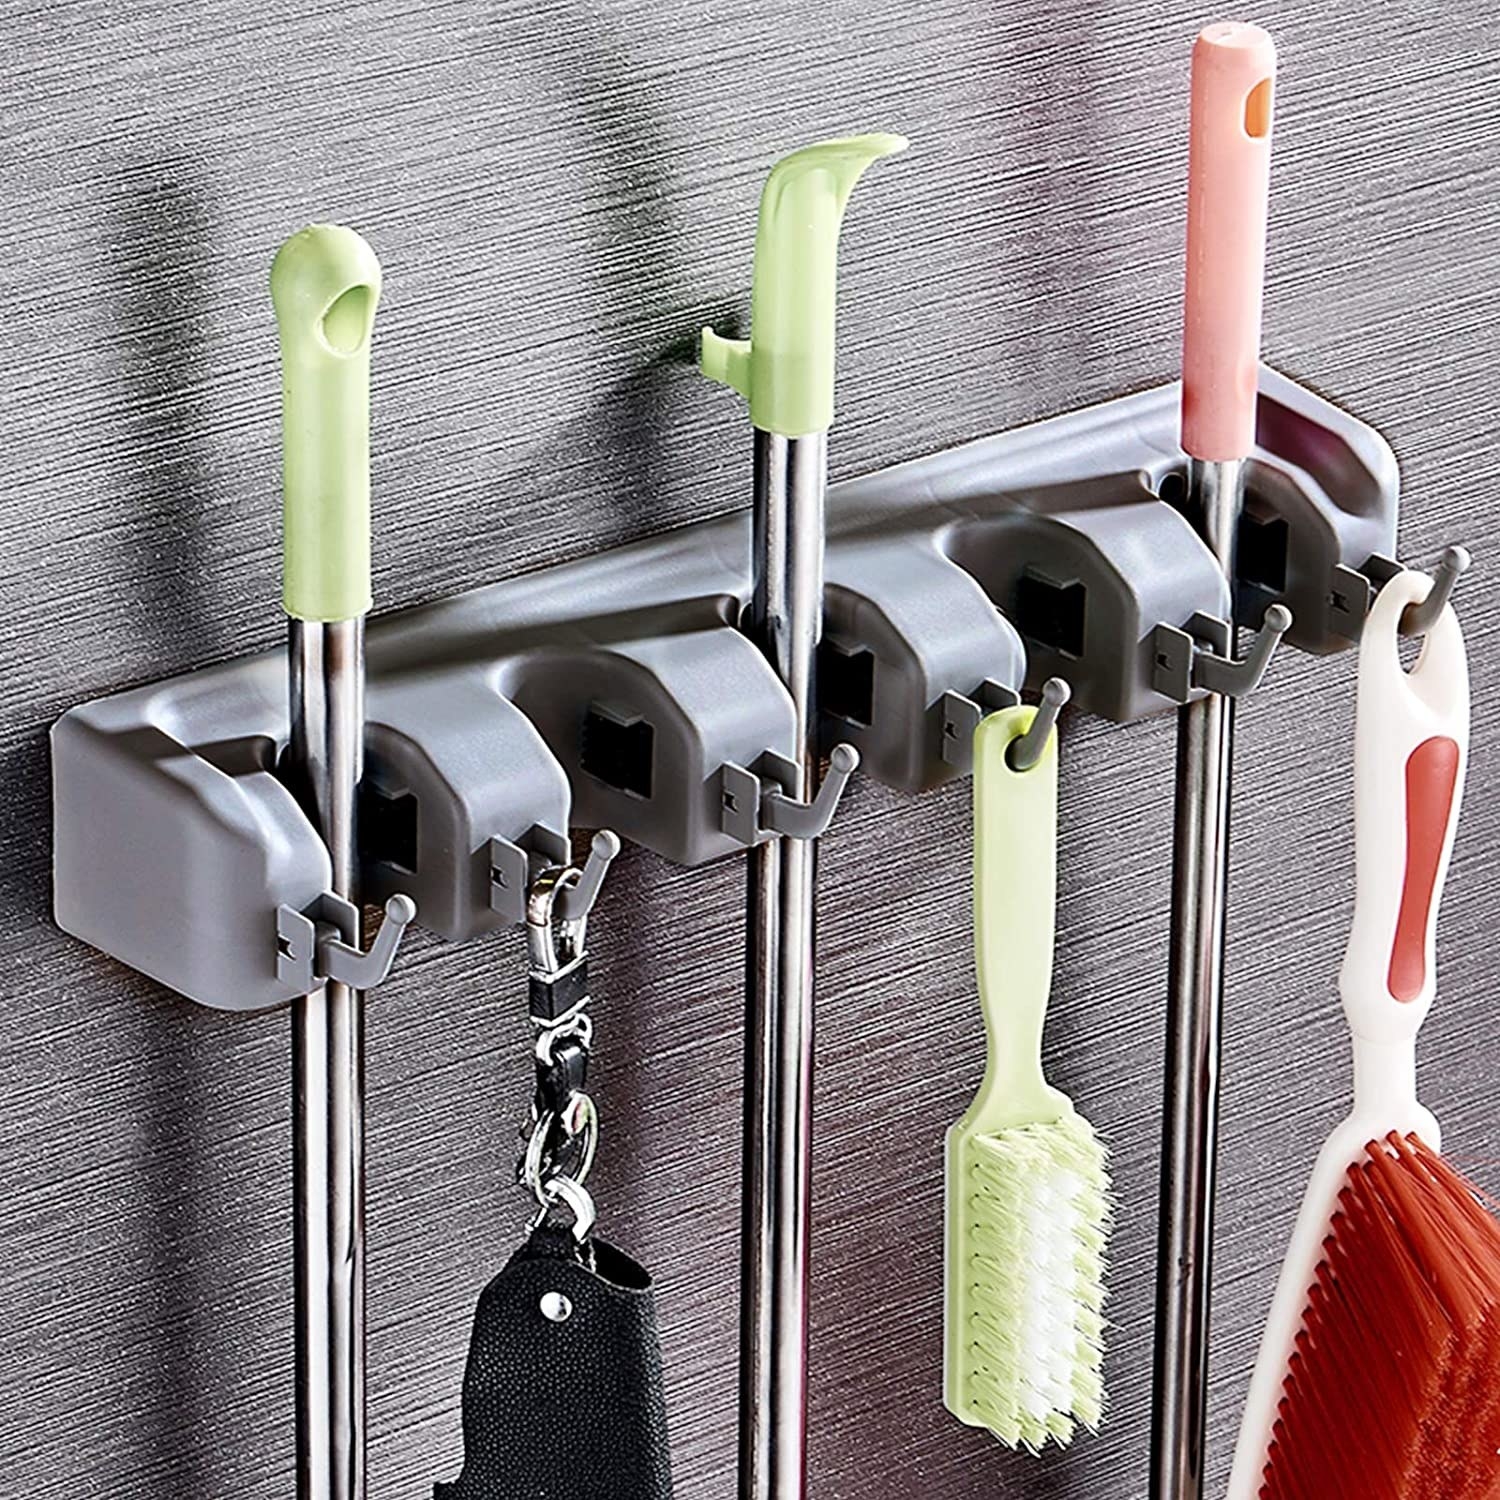 Cleaning supplies hanging off of the wall-mounted mop storage rack